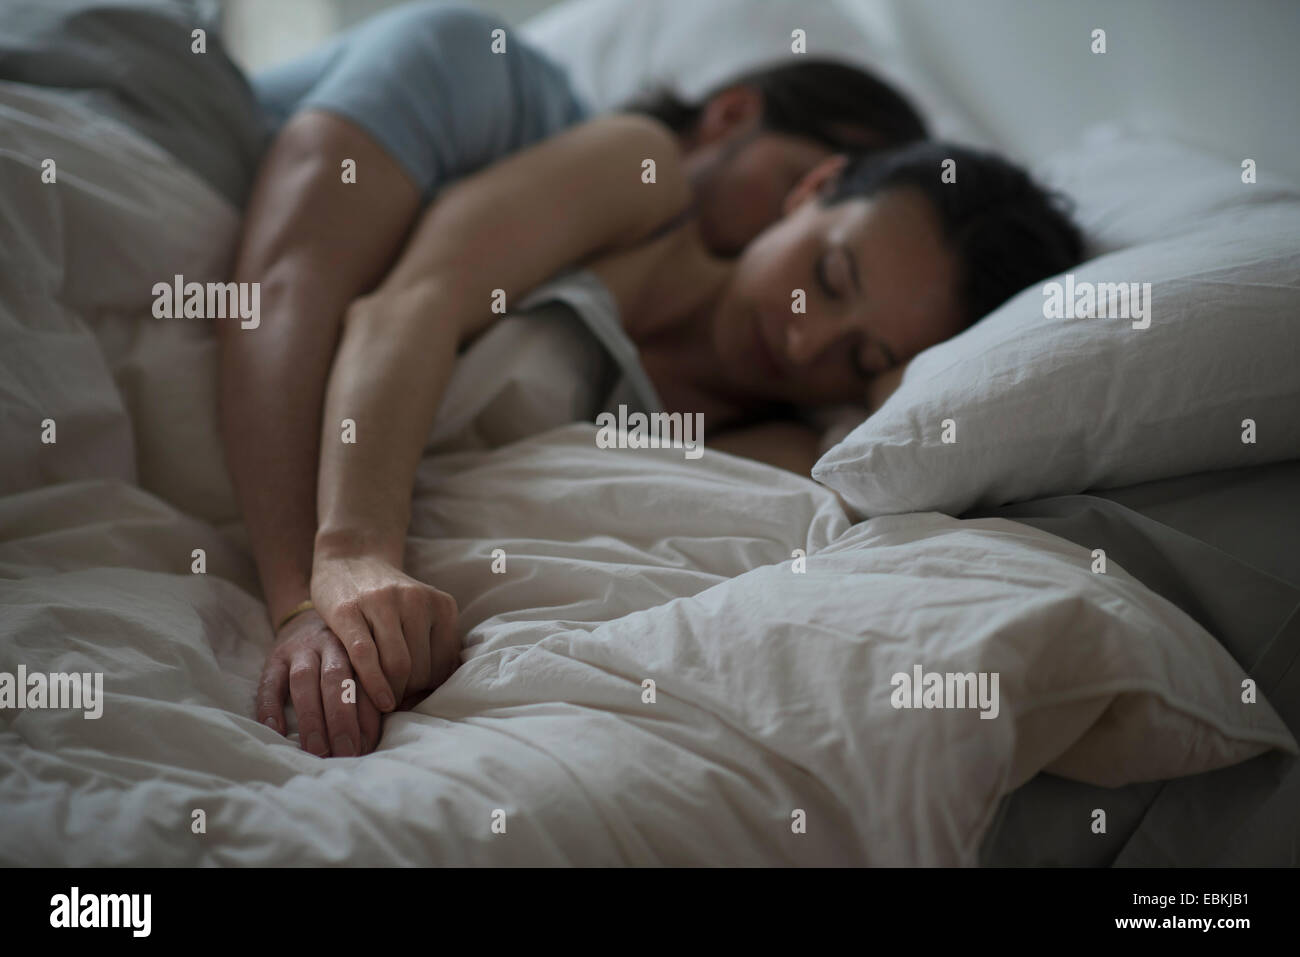 Couple sleeping together in bed at night Stock Photo